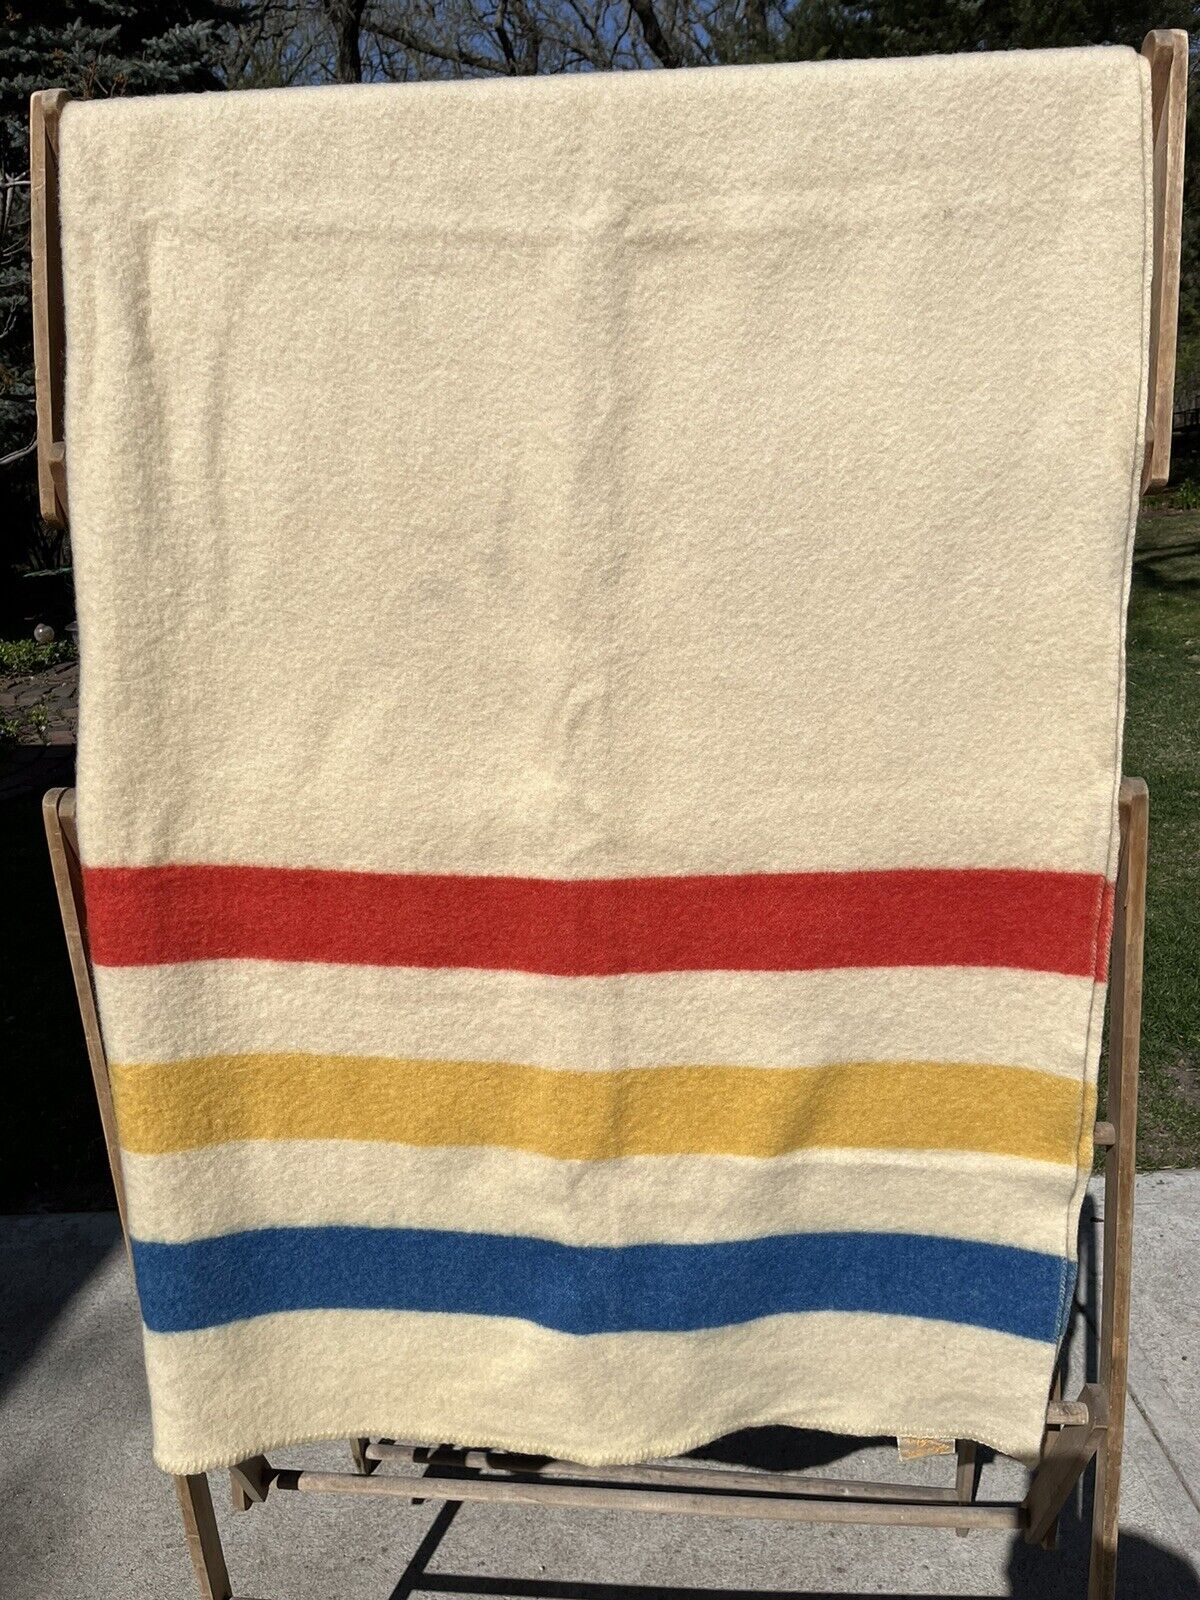 Vintage Orr Felt & Blanket Co. Cream With Blue Yellow & Red Stripes Wool Beauty